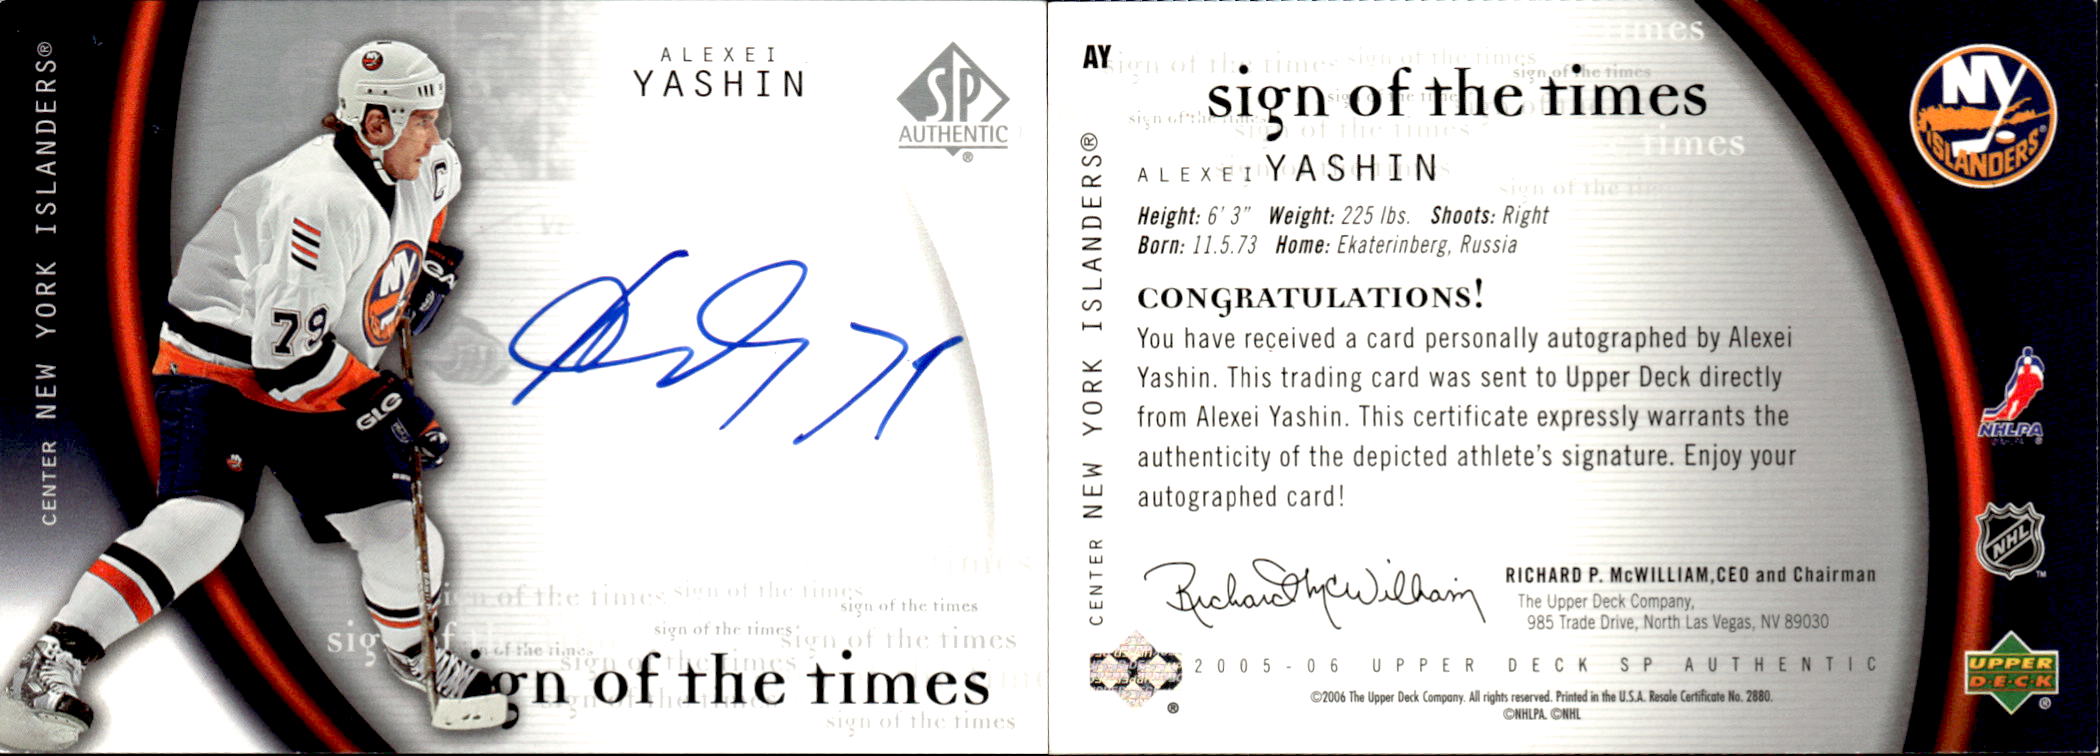 2005-06 SP Authentic Sign of the Times #AY Alexei Yashin